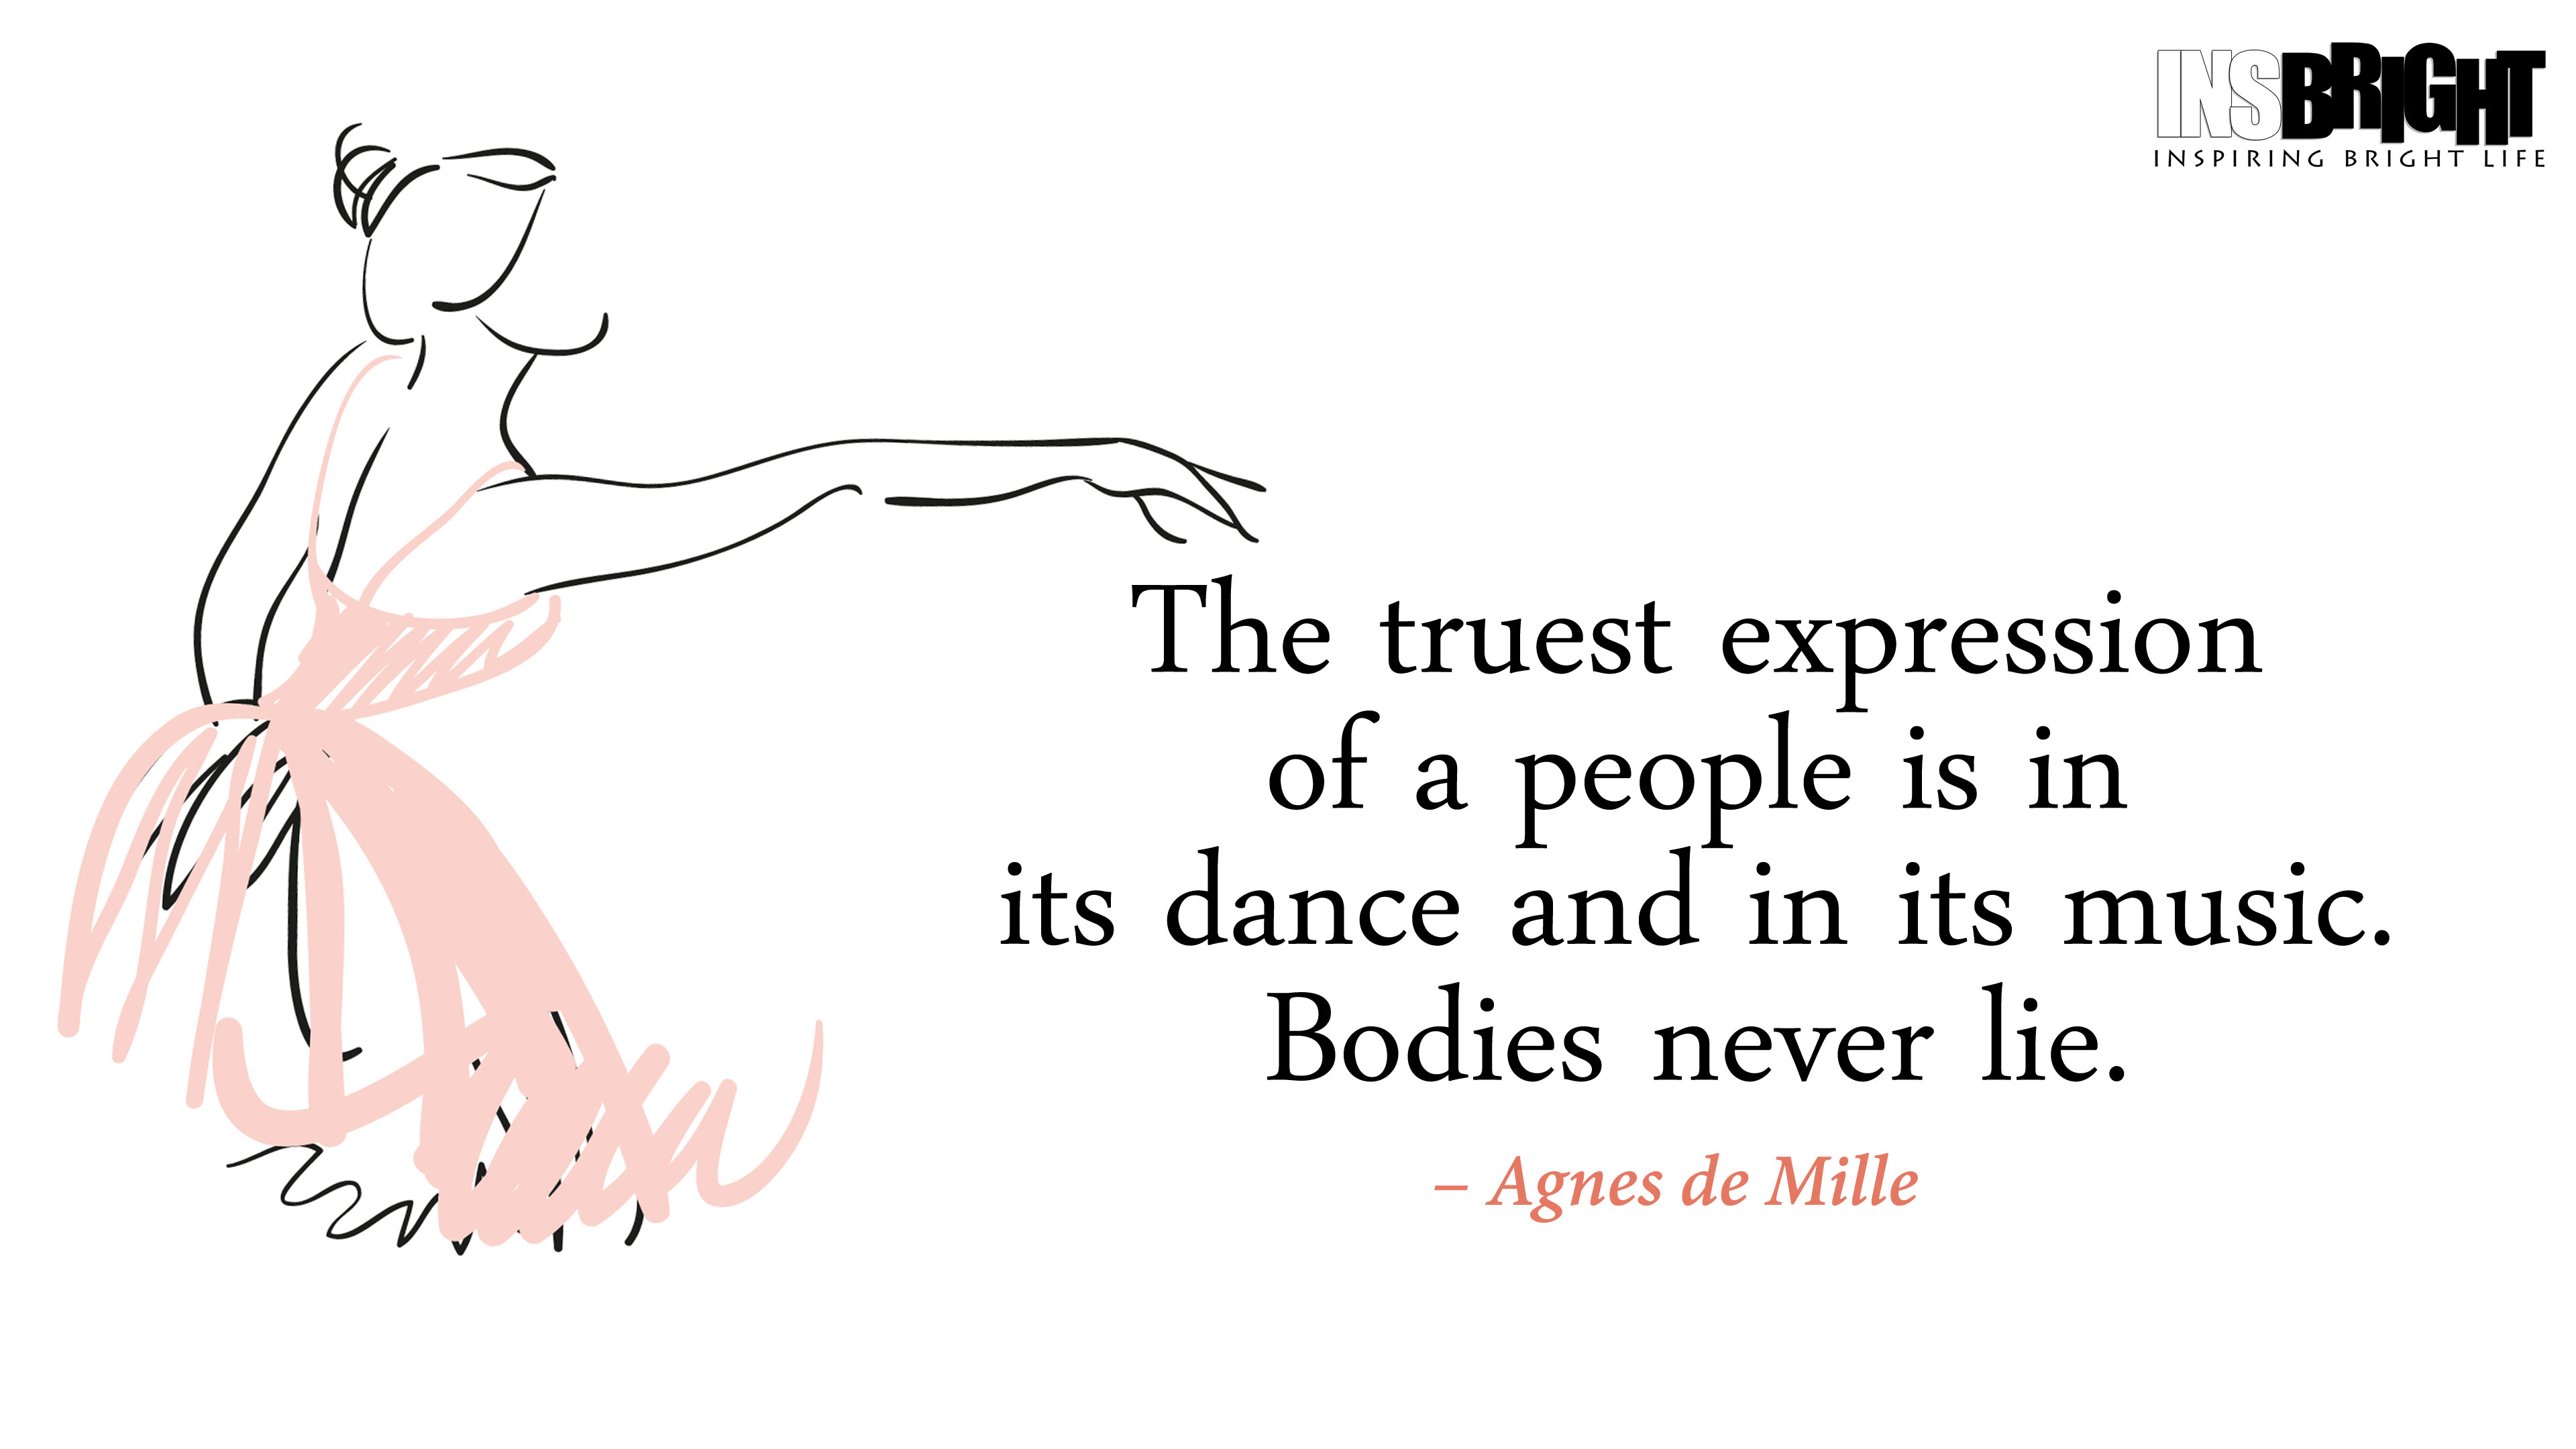 The truest expression of a people is in its dance and in its music. Bodies never lie. Agnes De Mille